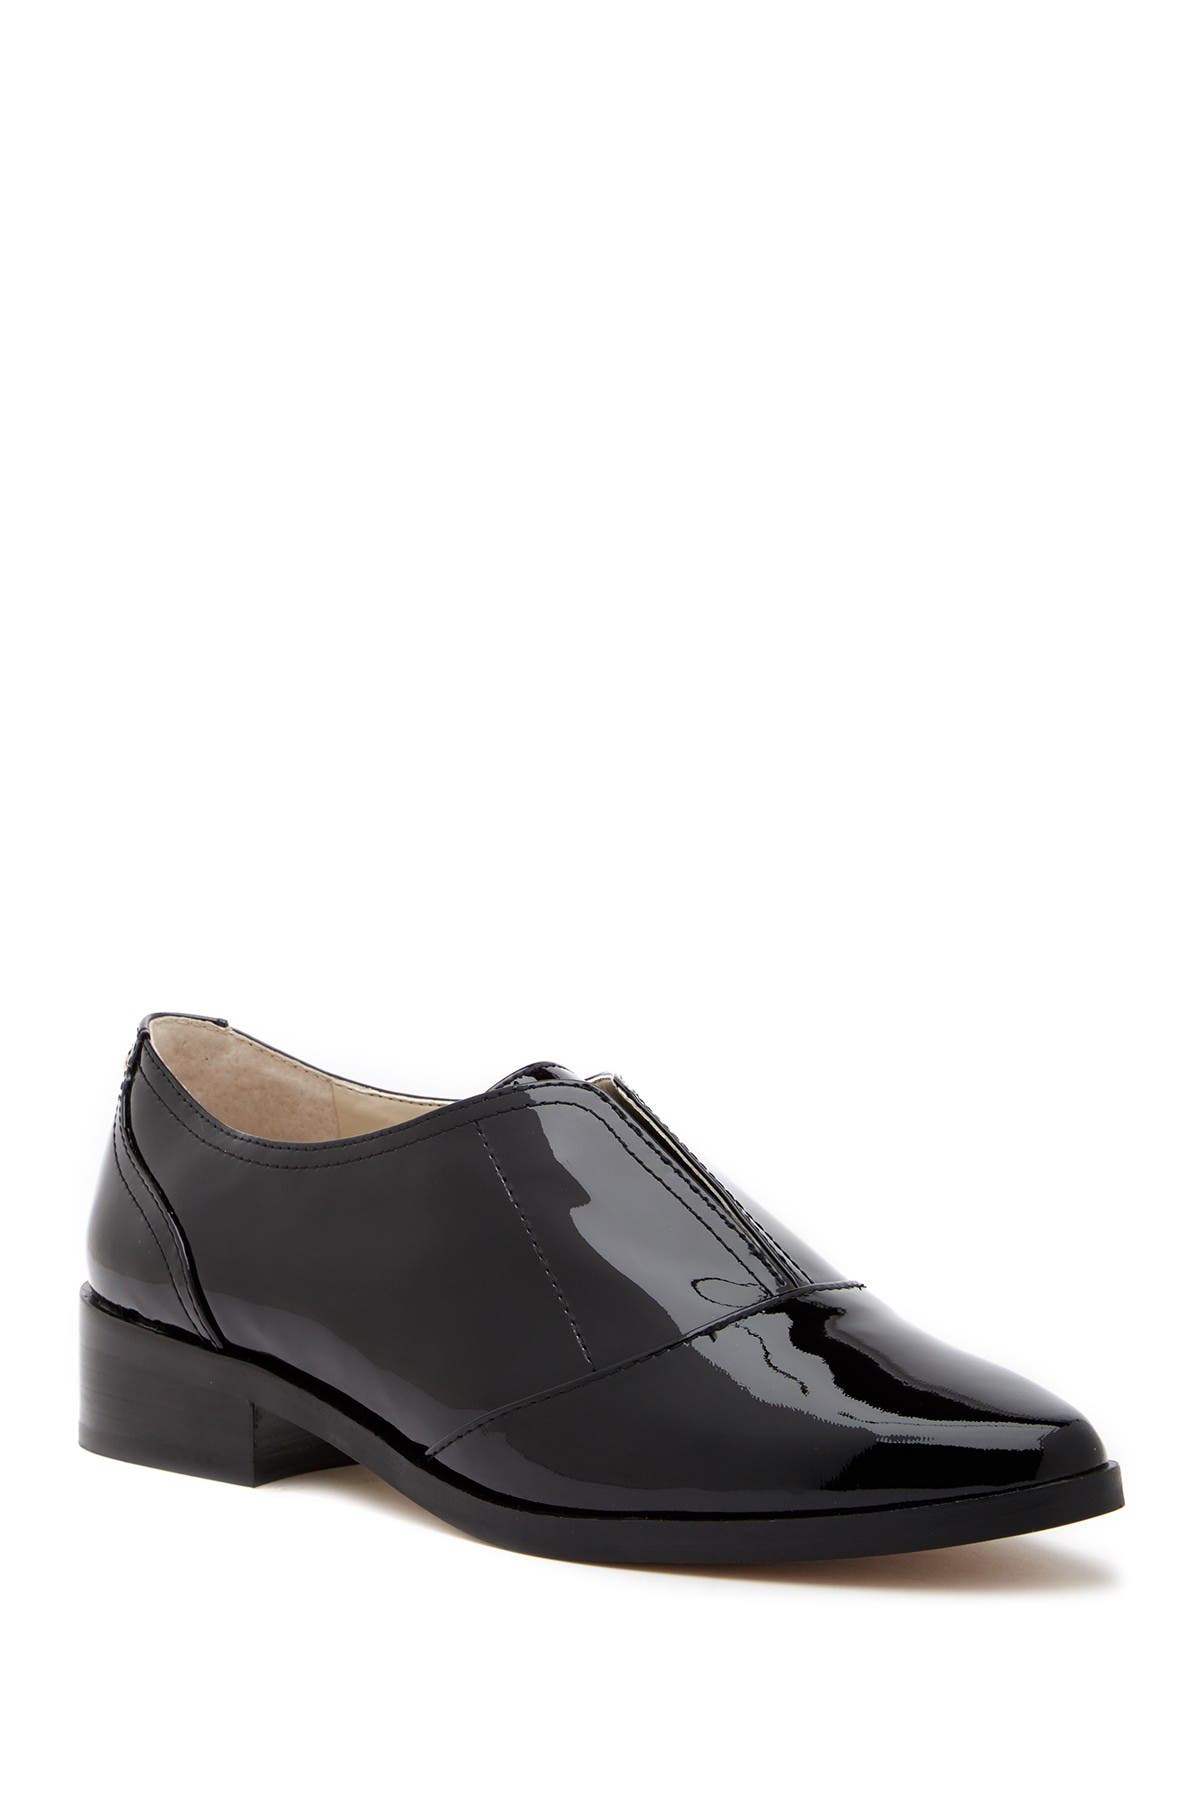 Louise et Cie | Aviana Leather Loafer 